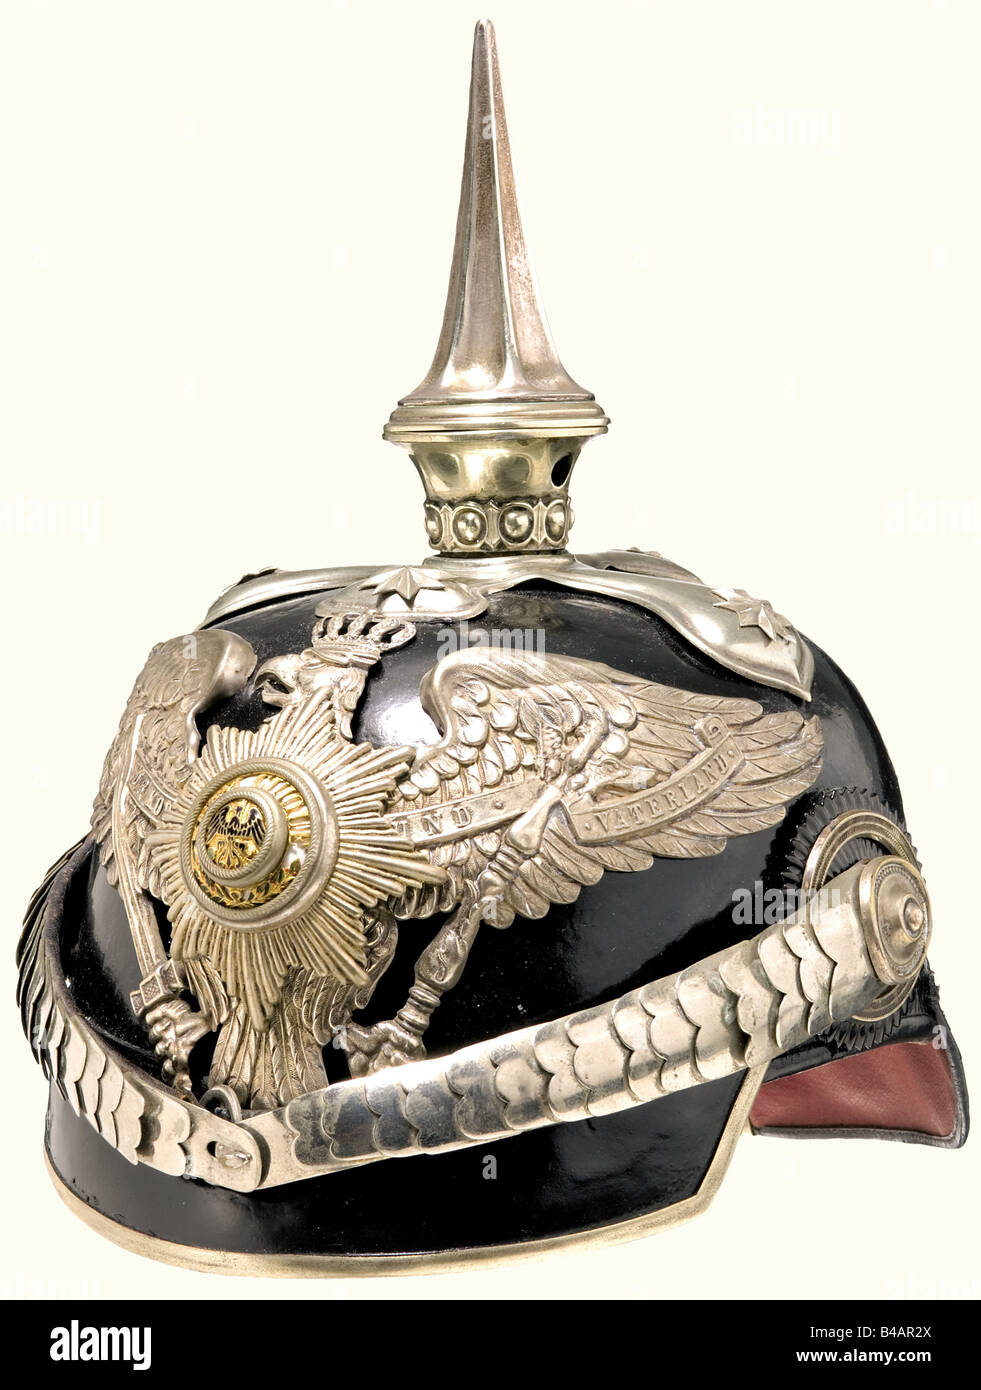 A model 91 helmet, for supernumerary generals Leather skull with silver mountings, fluted spike on a cross base, stars and plate with an enamelled star. Nickel-plated convex metal chinscales on rosette pins. Officer's cockade. Skull has been relacquered, and the mountings replaced with double holes. The cross is broken off the eagle's crown. Spike loose. Sweatband and ribbed silk lining torn. historic, historical, 19th century, Prussian, Prussia, German, Germany, militaria, military, object, objects, stills, clipping, clippings, cut out, cut-out, cut-outs, helm, Stock Photo